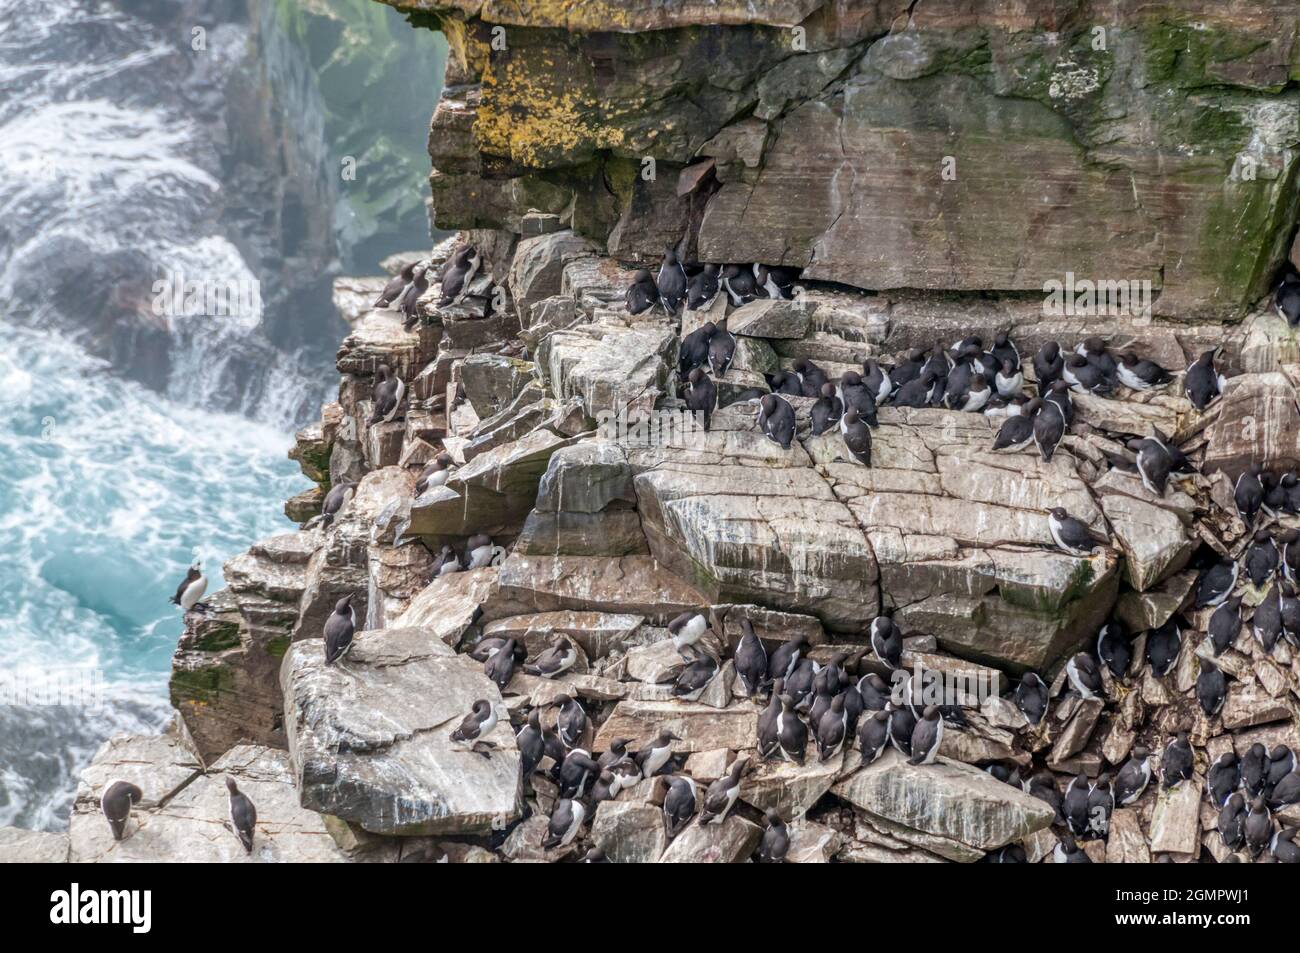 Common murre or guillemot on the cliffs at the Cape St. Mary's Ecological Reserve in Newfoundland, Canada. Stock Photo